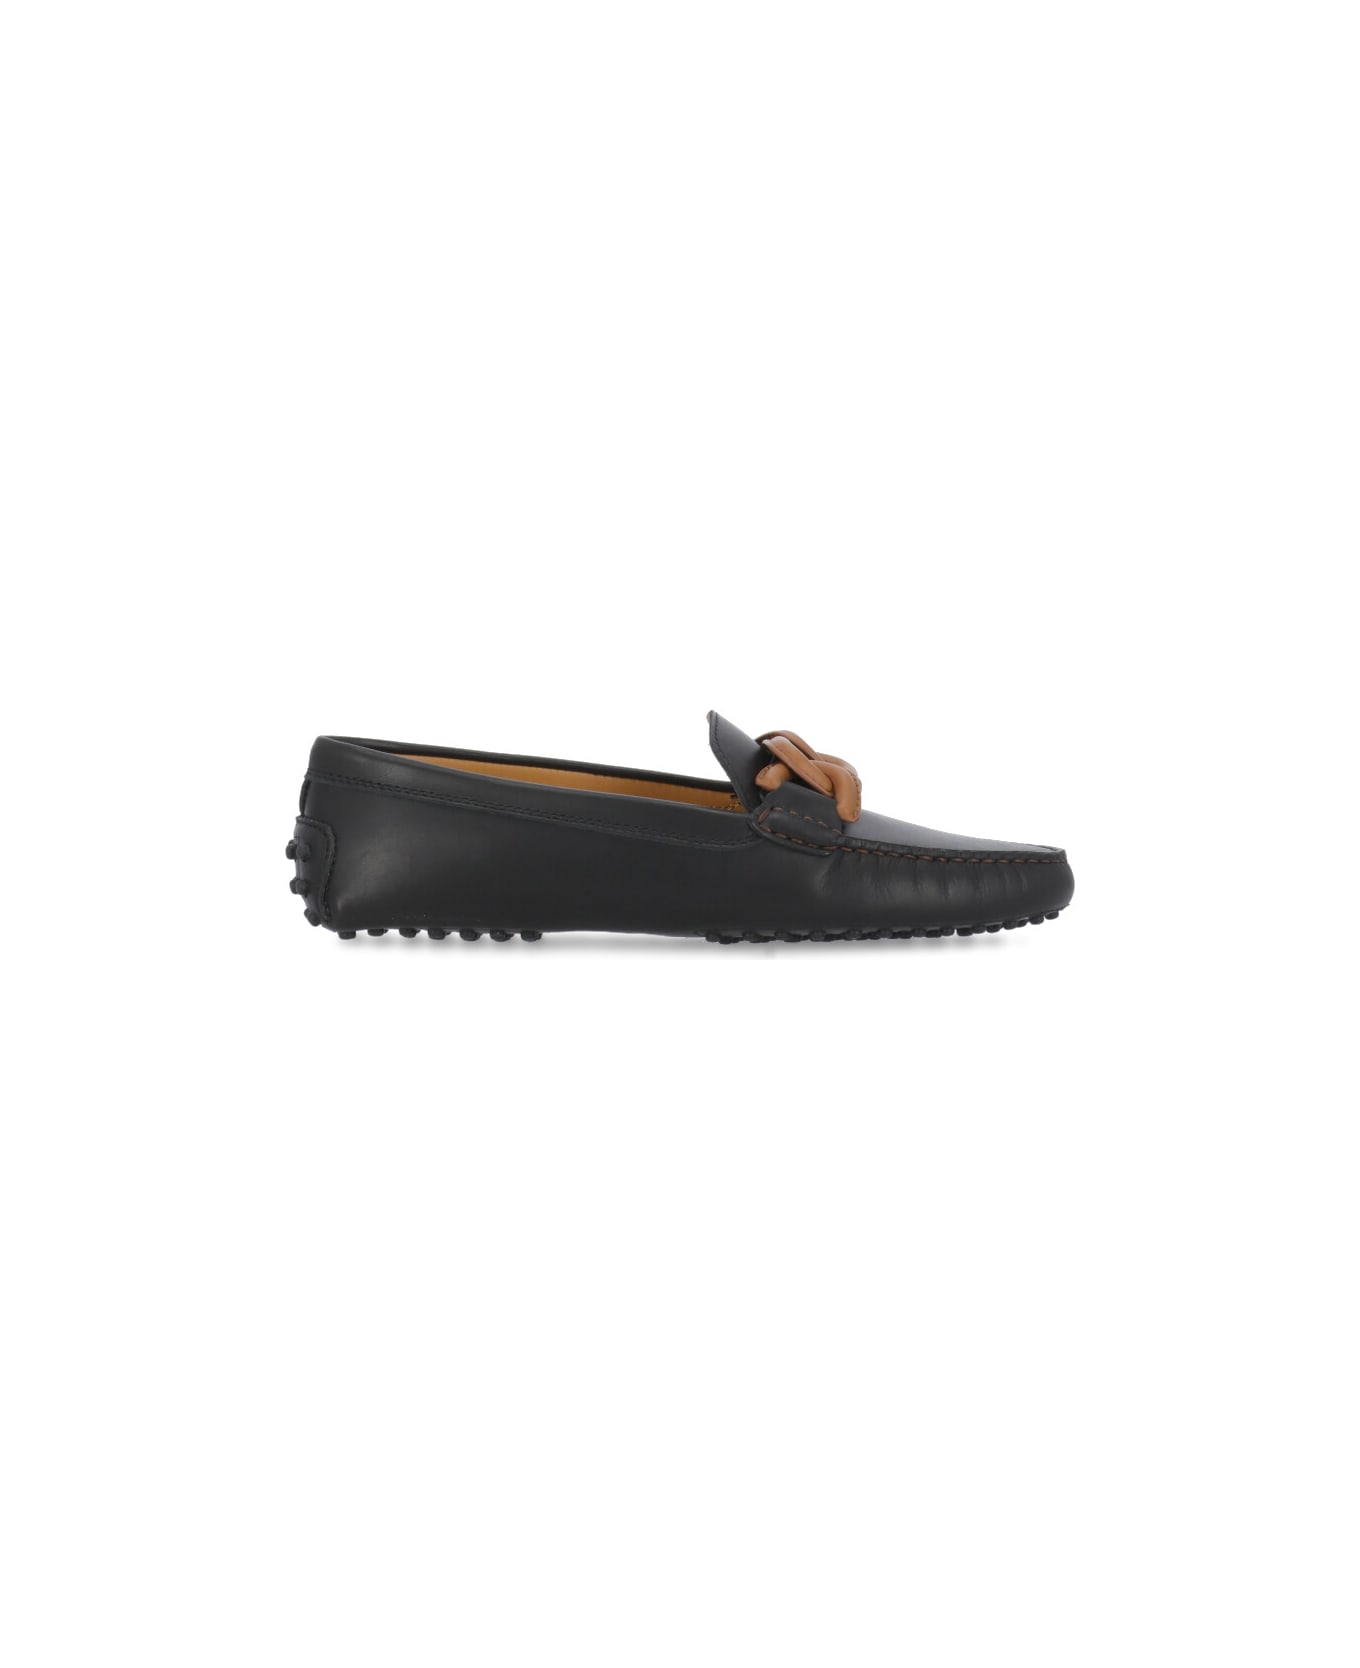 Tod's Gommino Kate Leather Moccasin - Black フラットシューズ